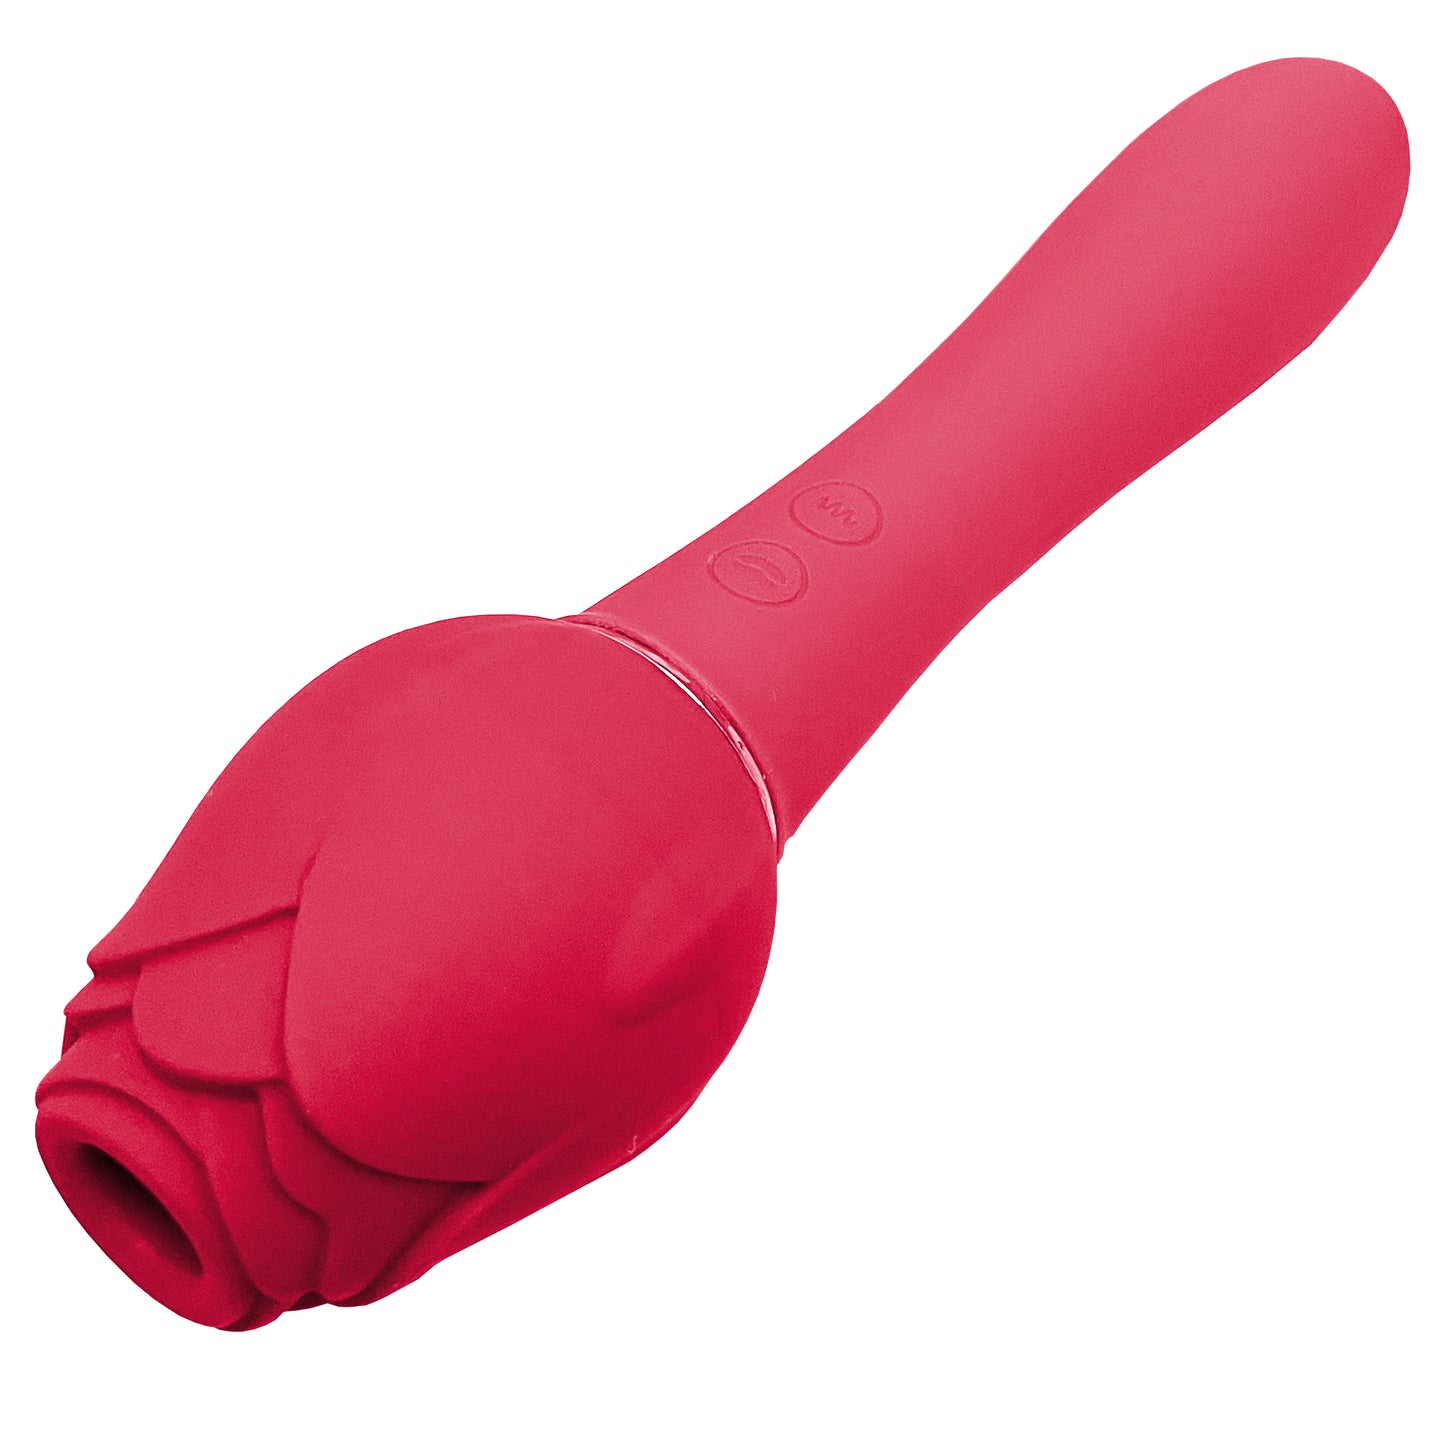 Bloom Double-Ended Rose Vibrator